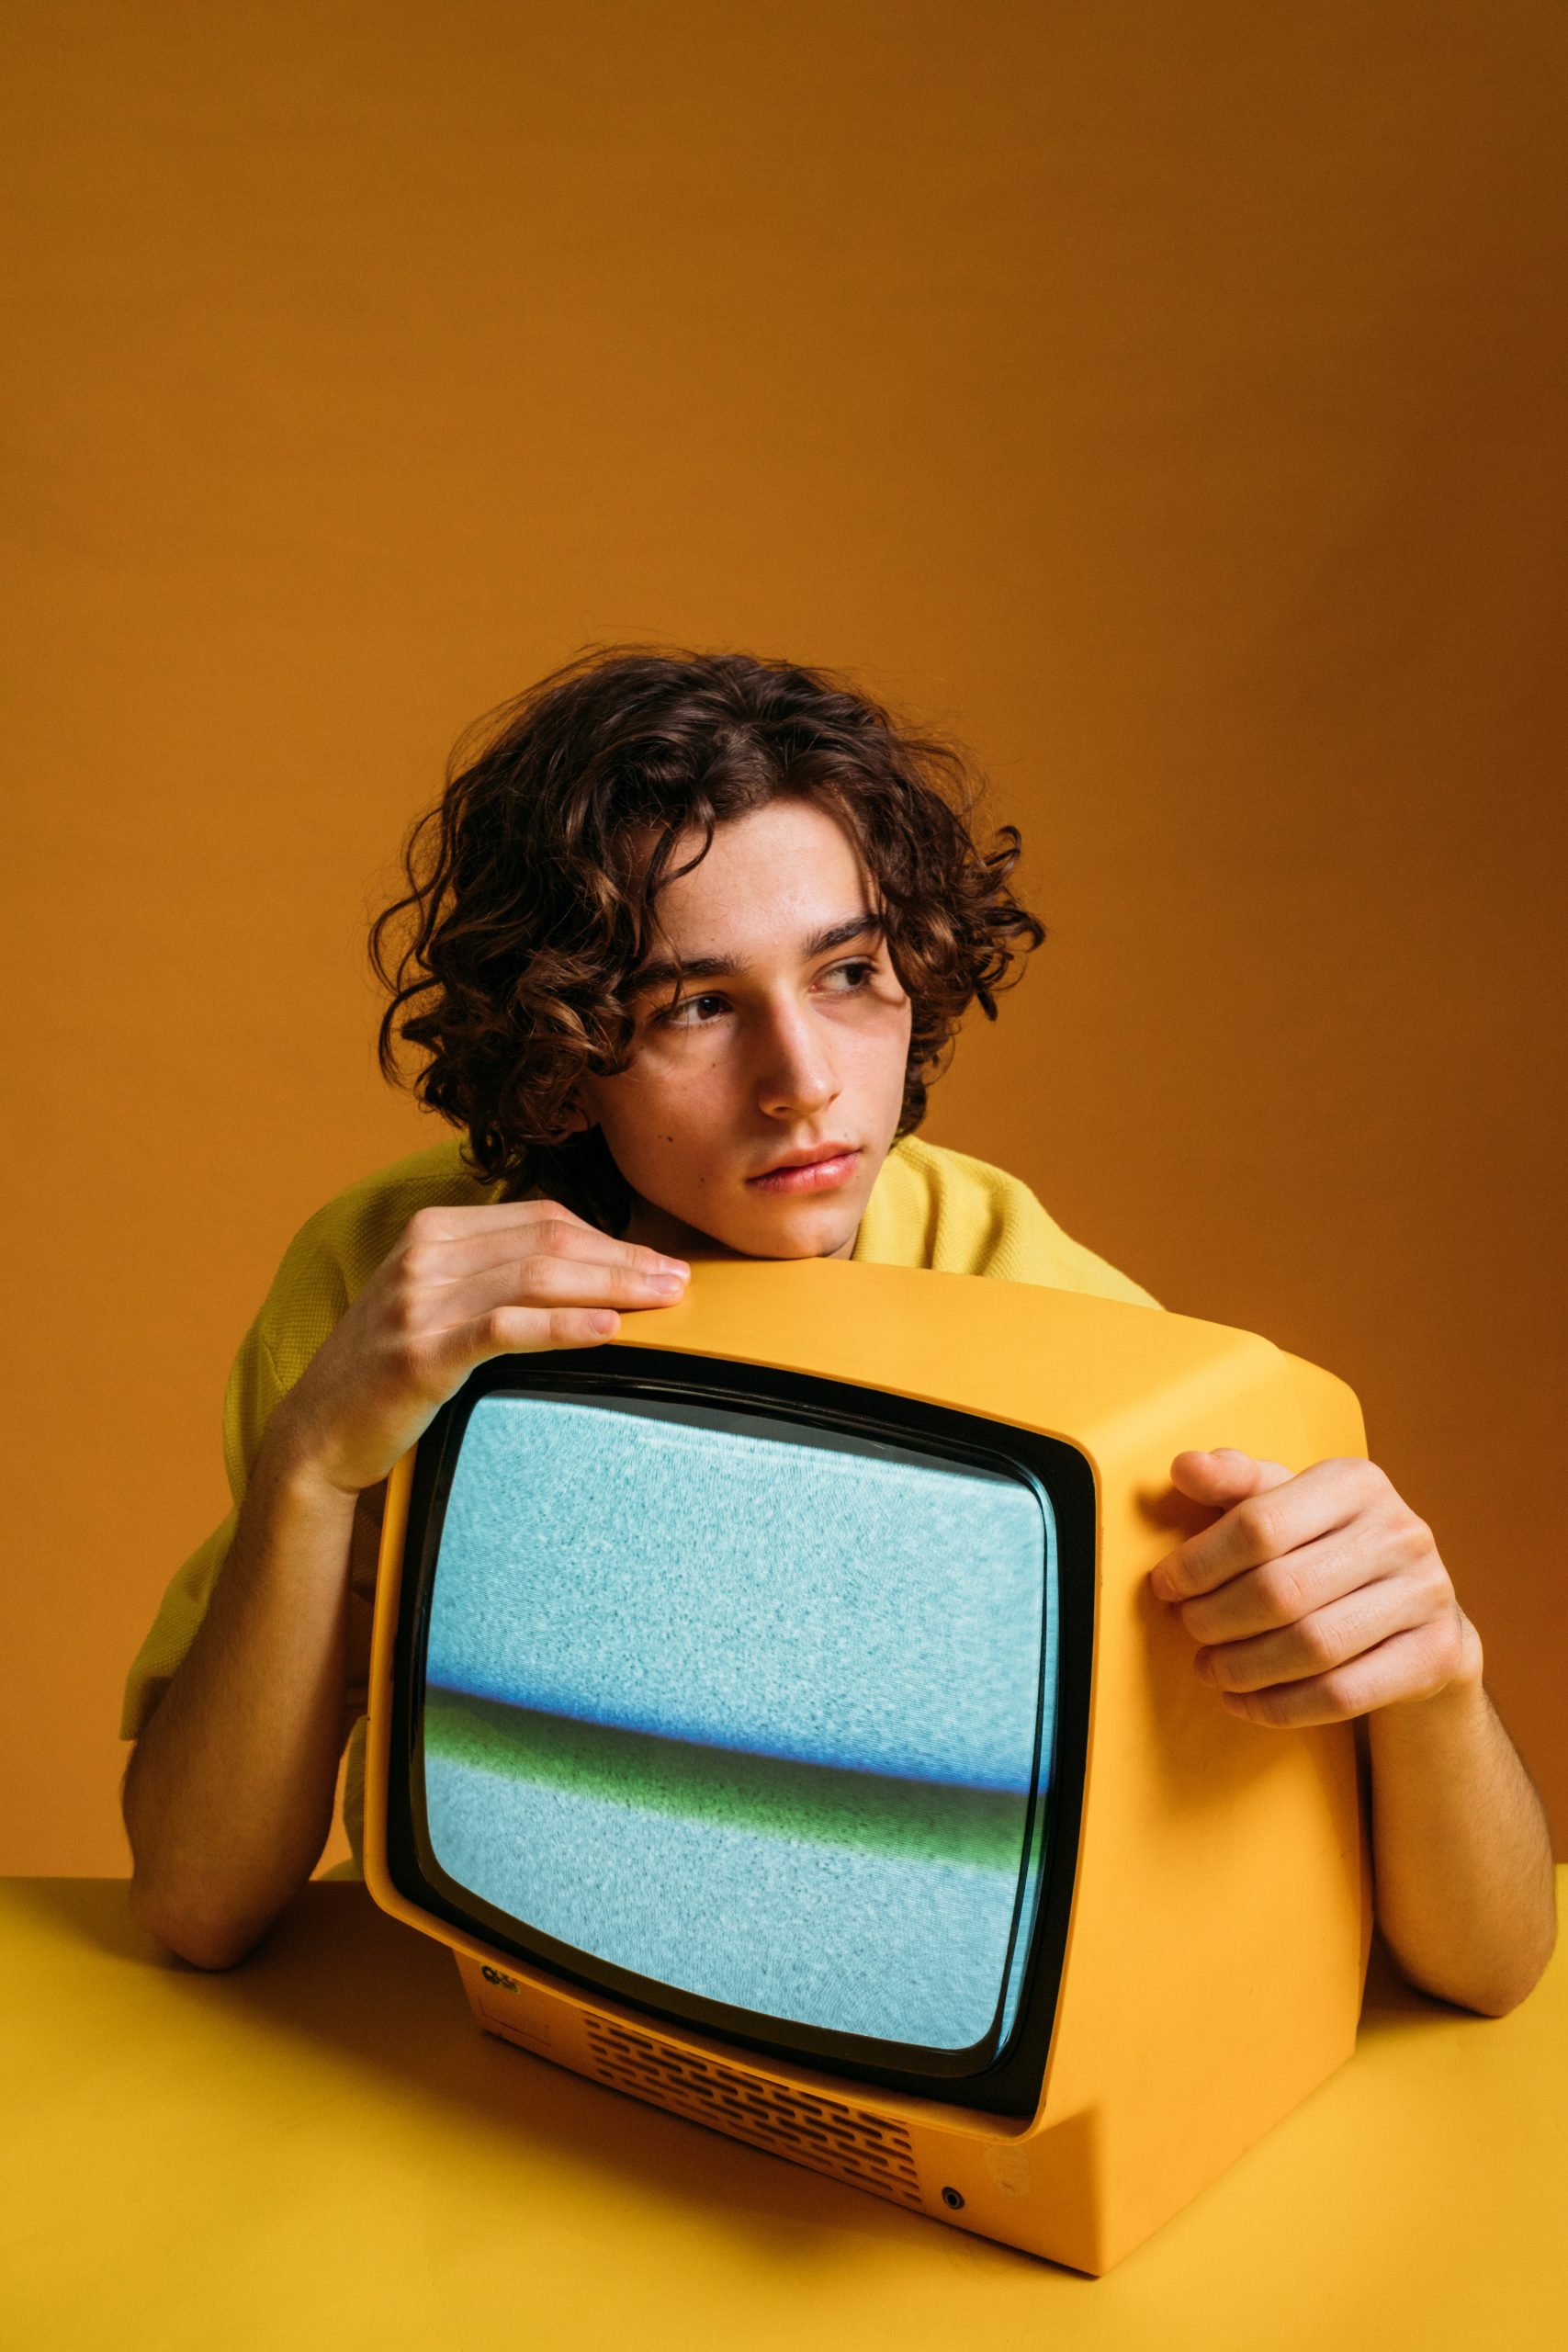 image of a teen with a television in need of alcohol treatment